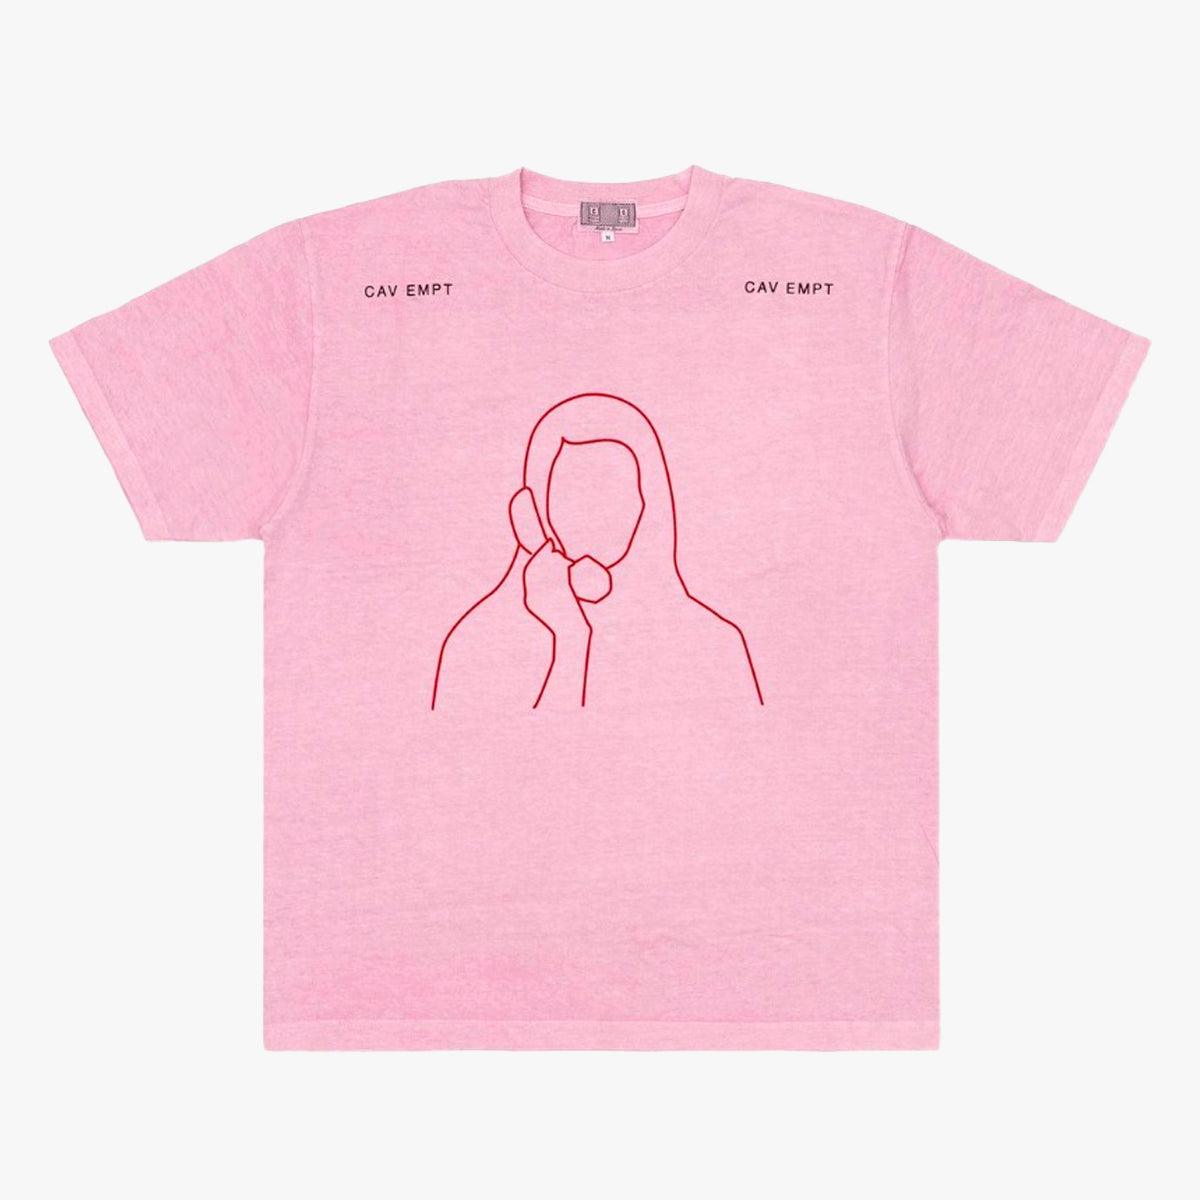 Hello Babe Pink T-Shirt - Aesthetic Clothes Shop